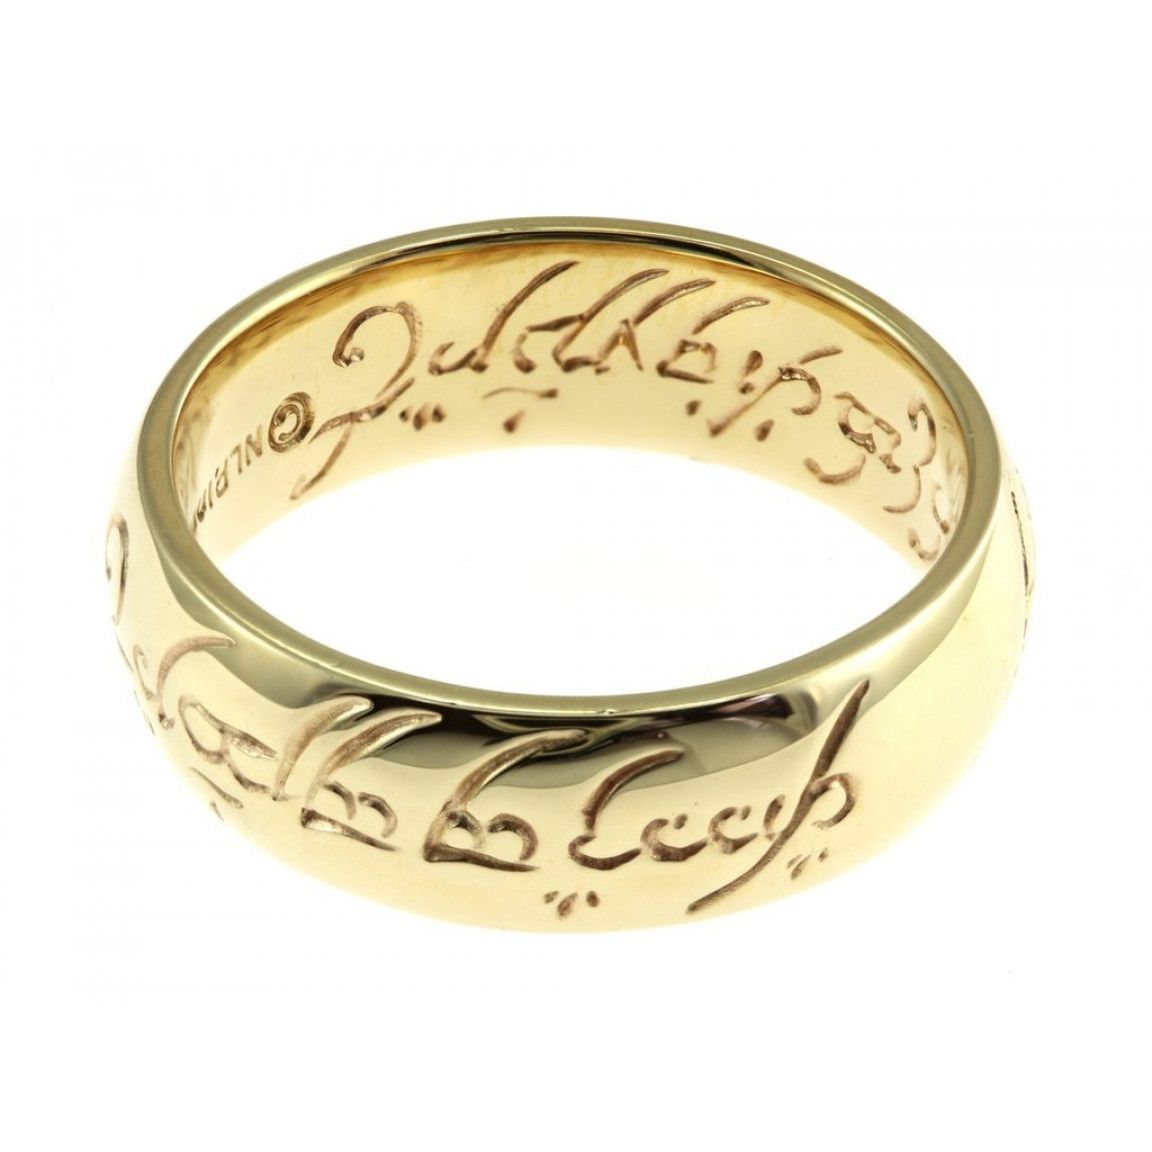 Official Lord of the Rings 9ct Yellow Gold wedding ring